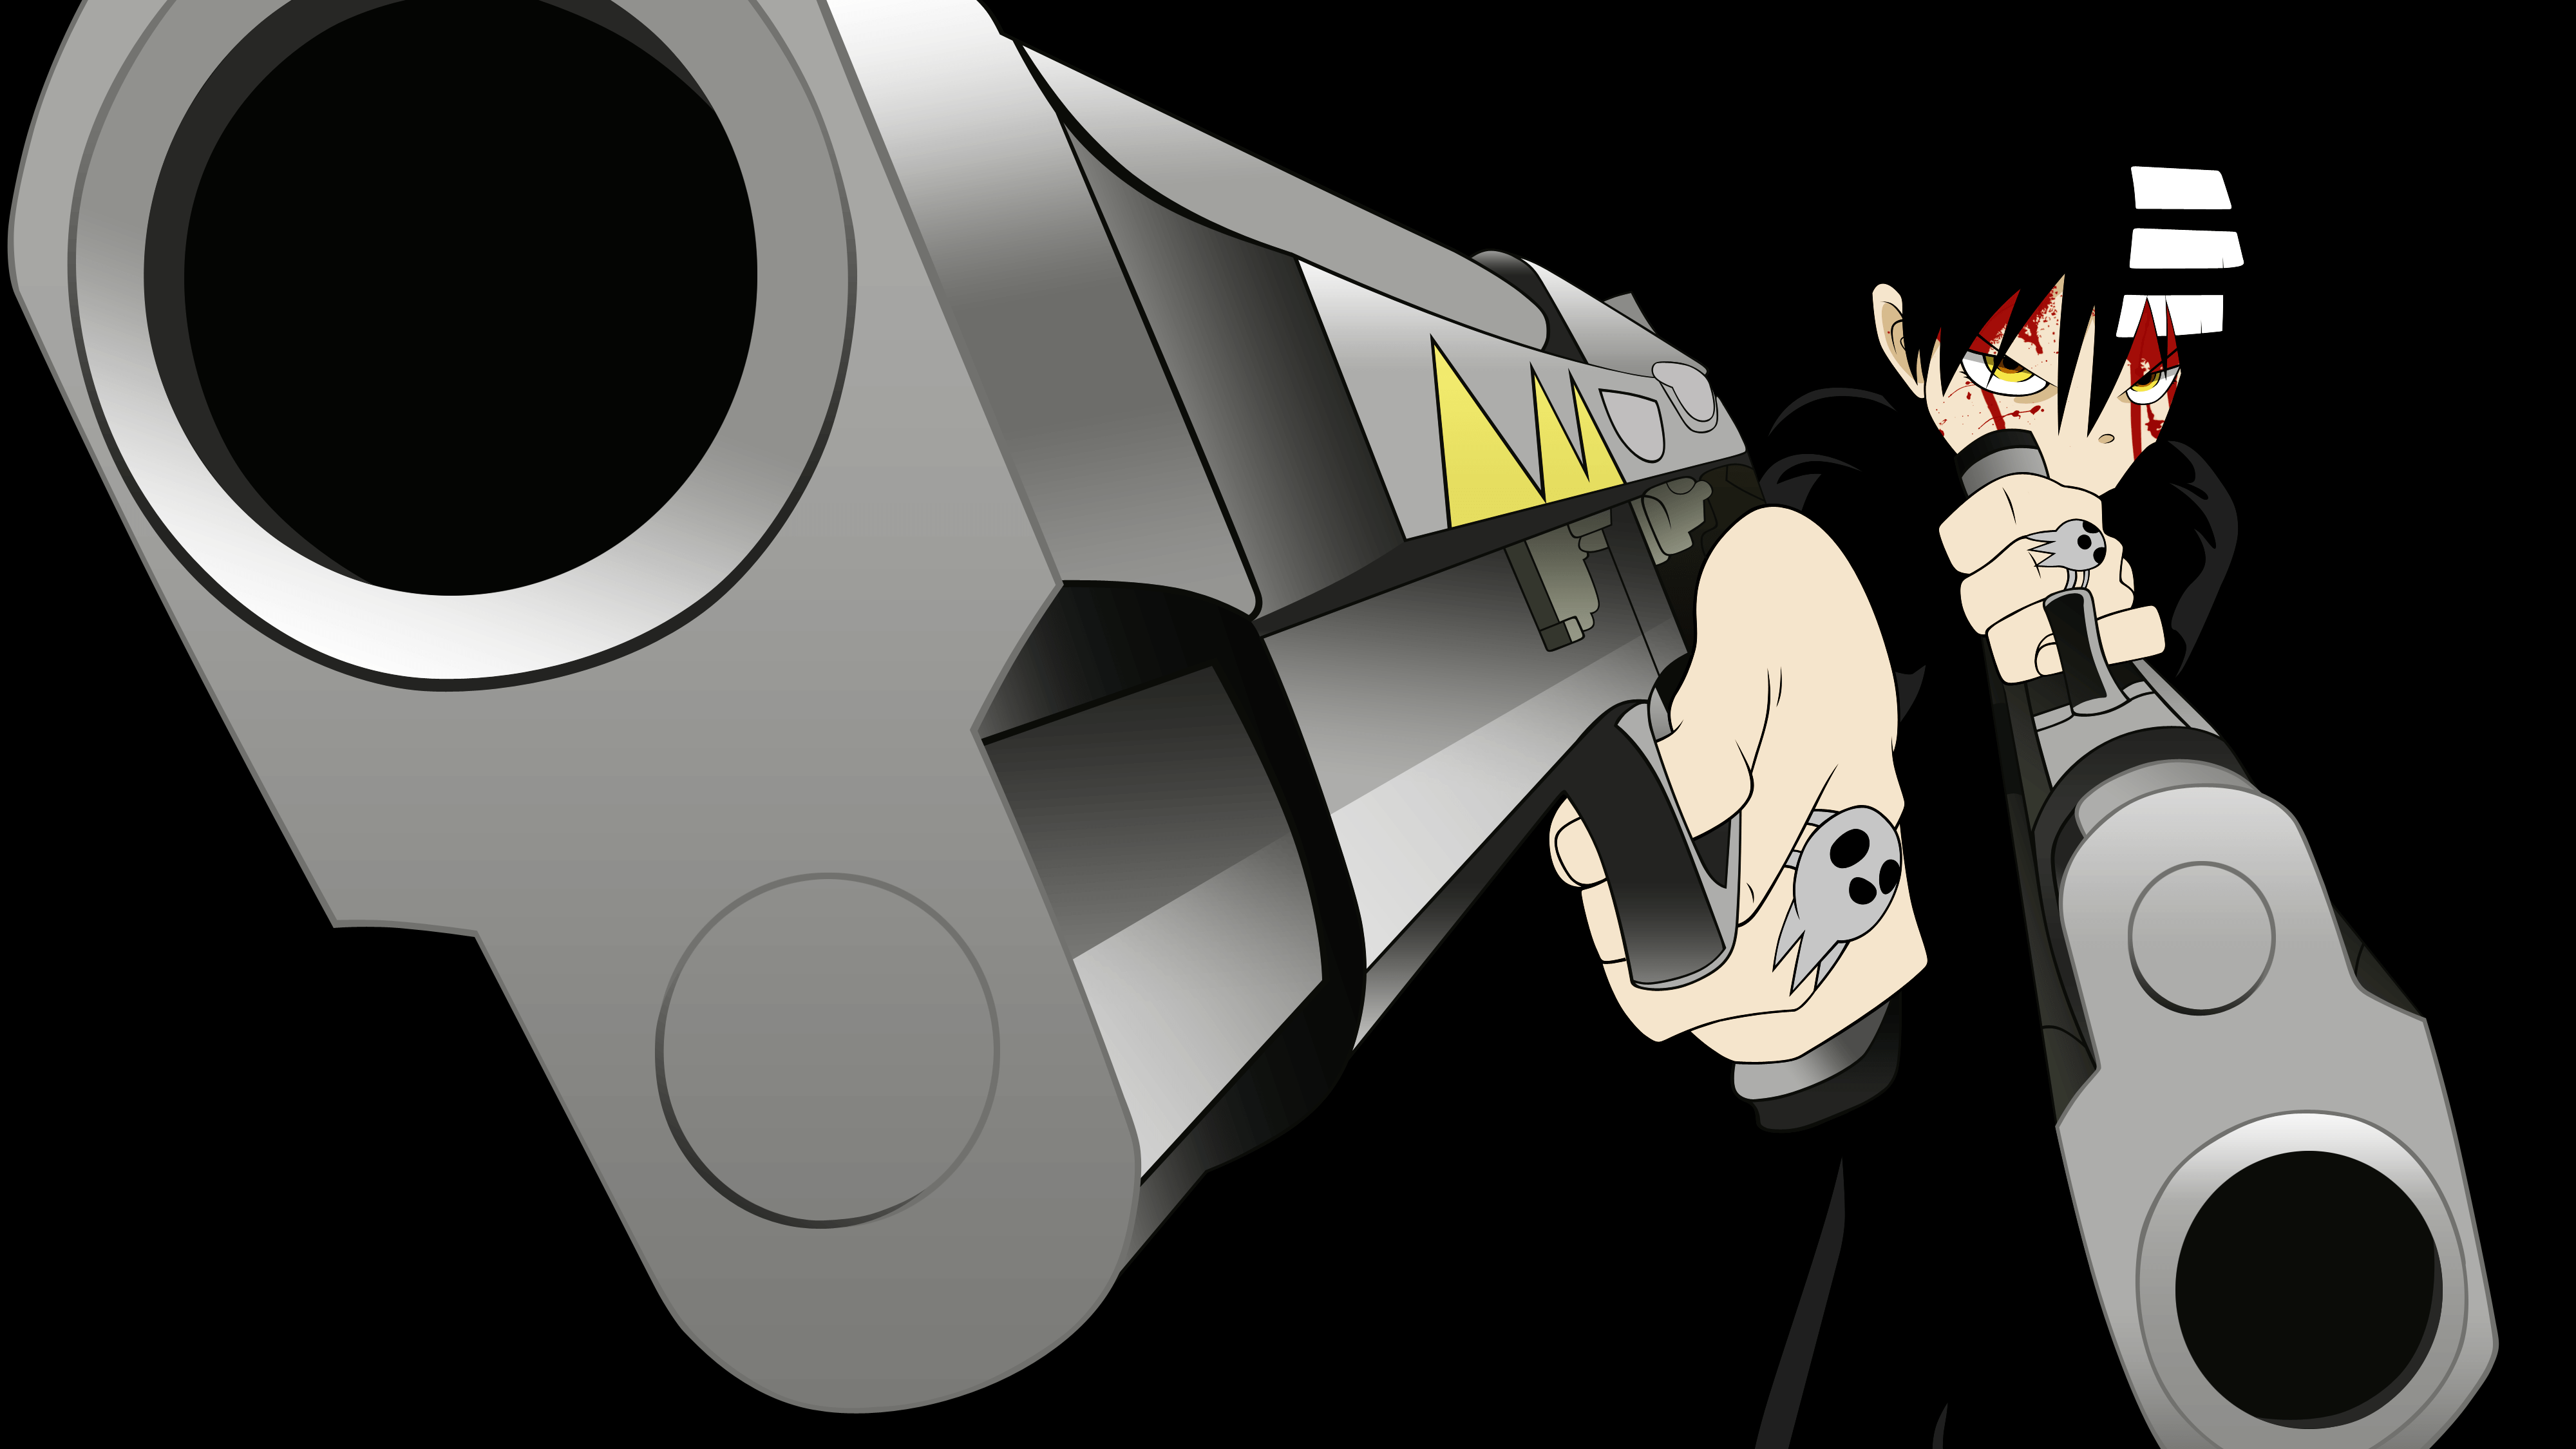 Soul Eater 4k Ultra HD Wallpapers and Backgrounds Image